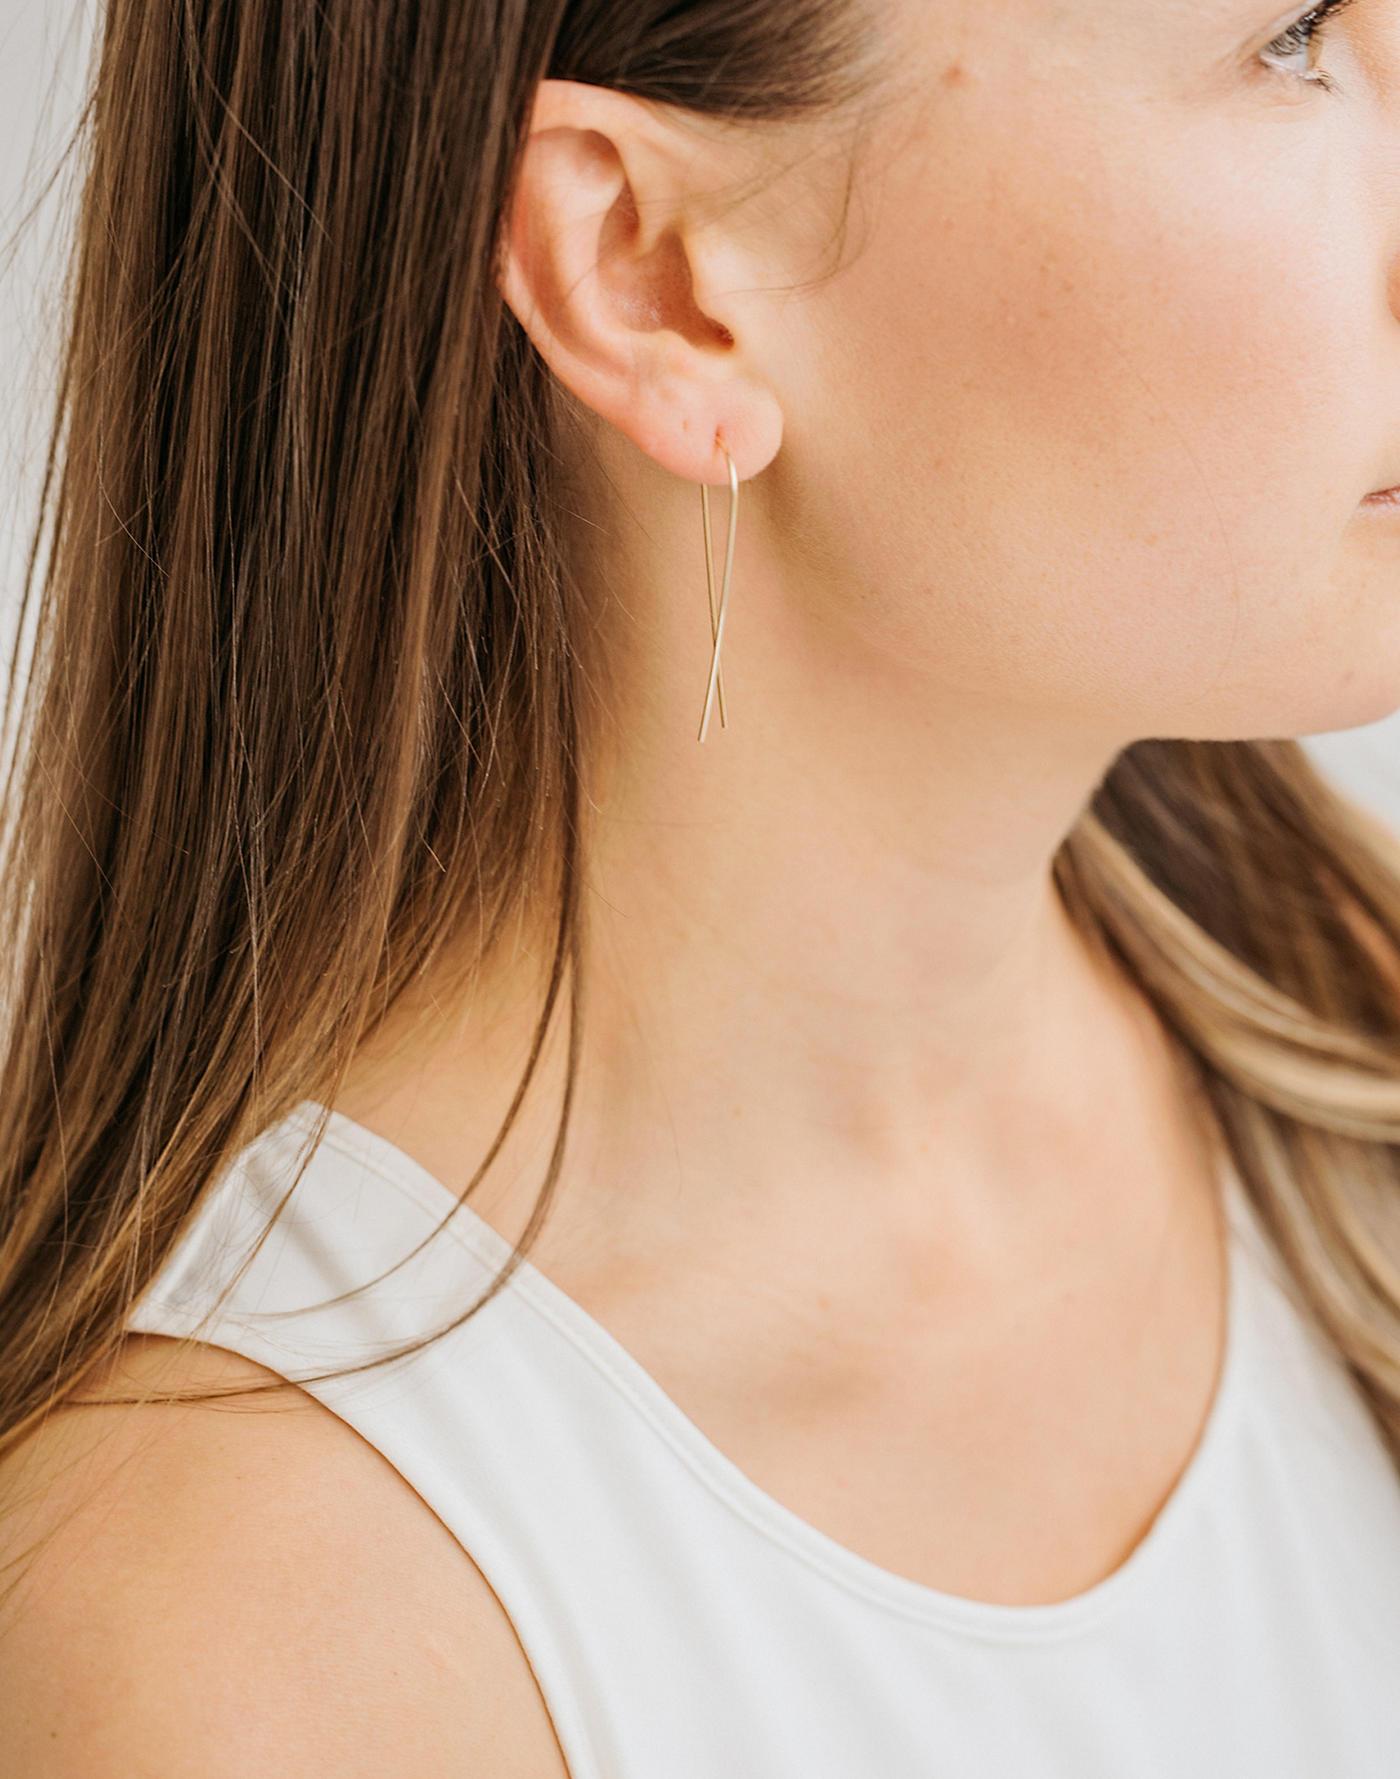 MW Sheena Marshall Jewelry Telluride Earrings in Natural | Lyst